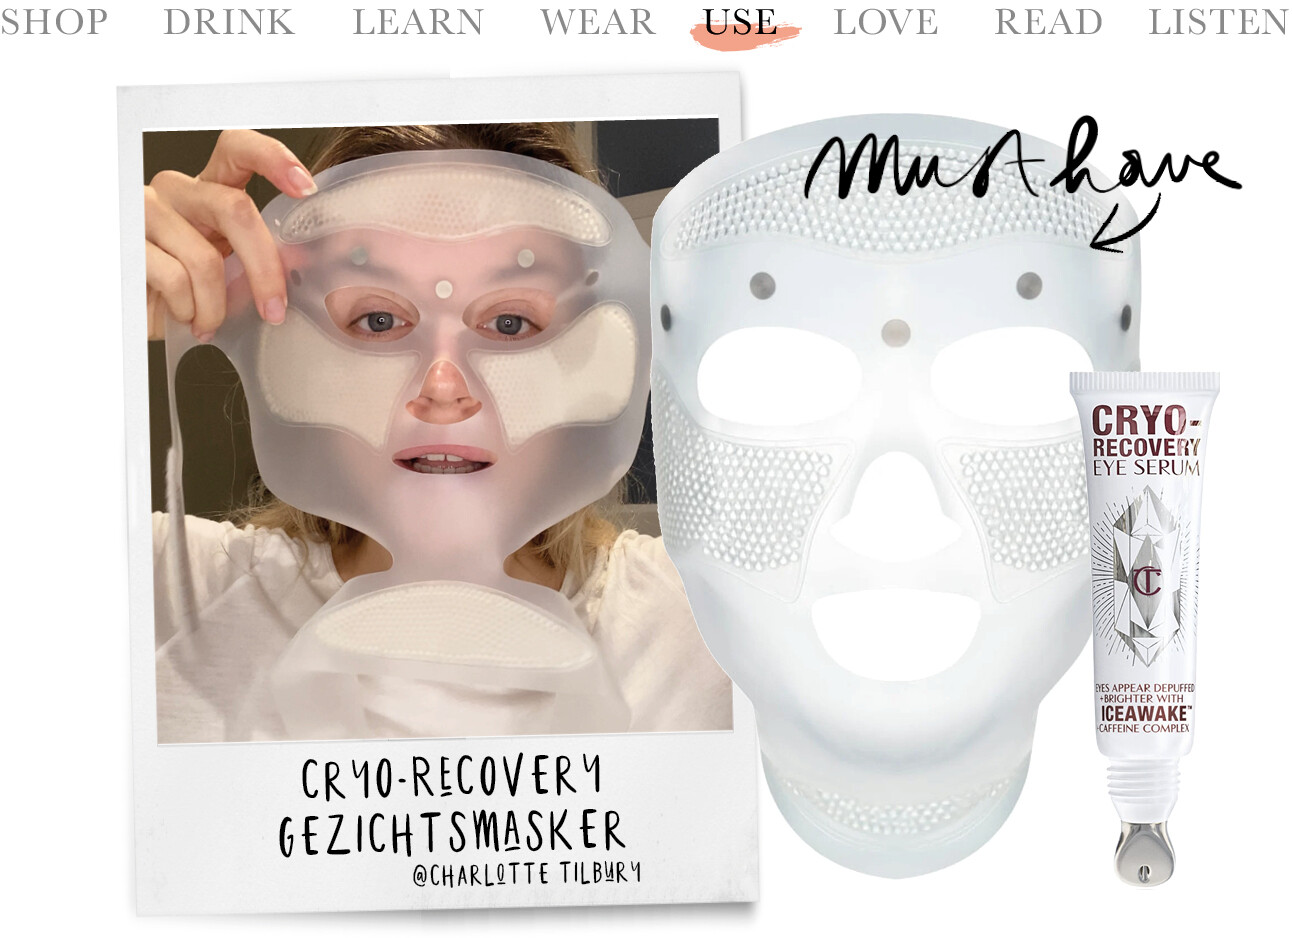 Charlotte Tilbury Cryo-Recovery Face Mask